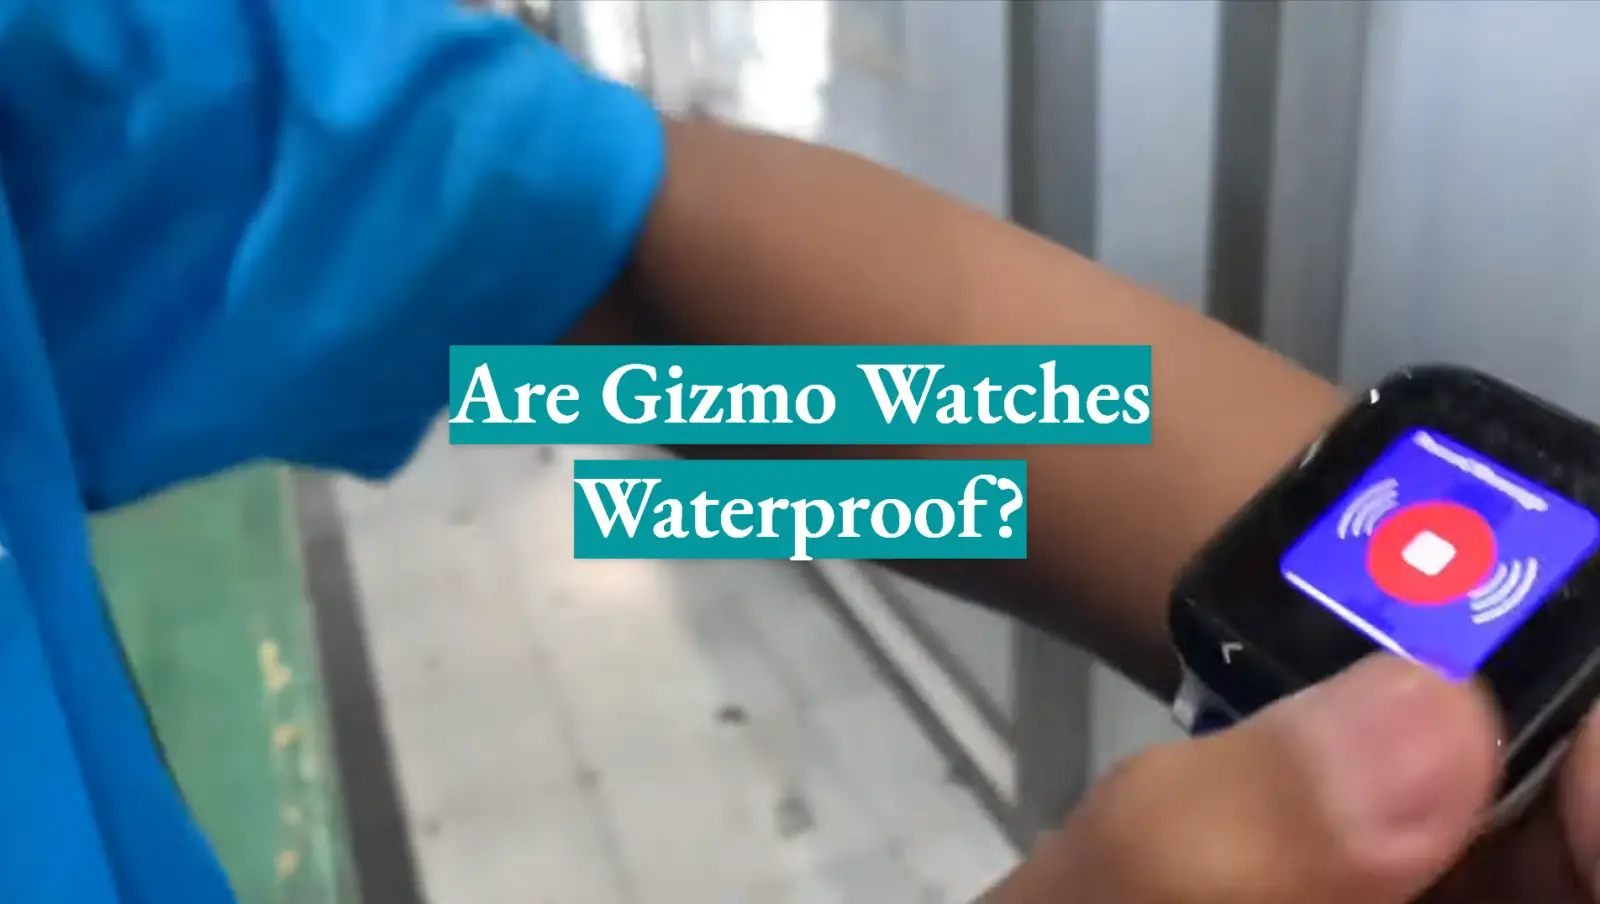 Are Gizmo Watches Waterproof?